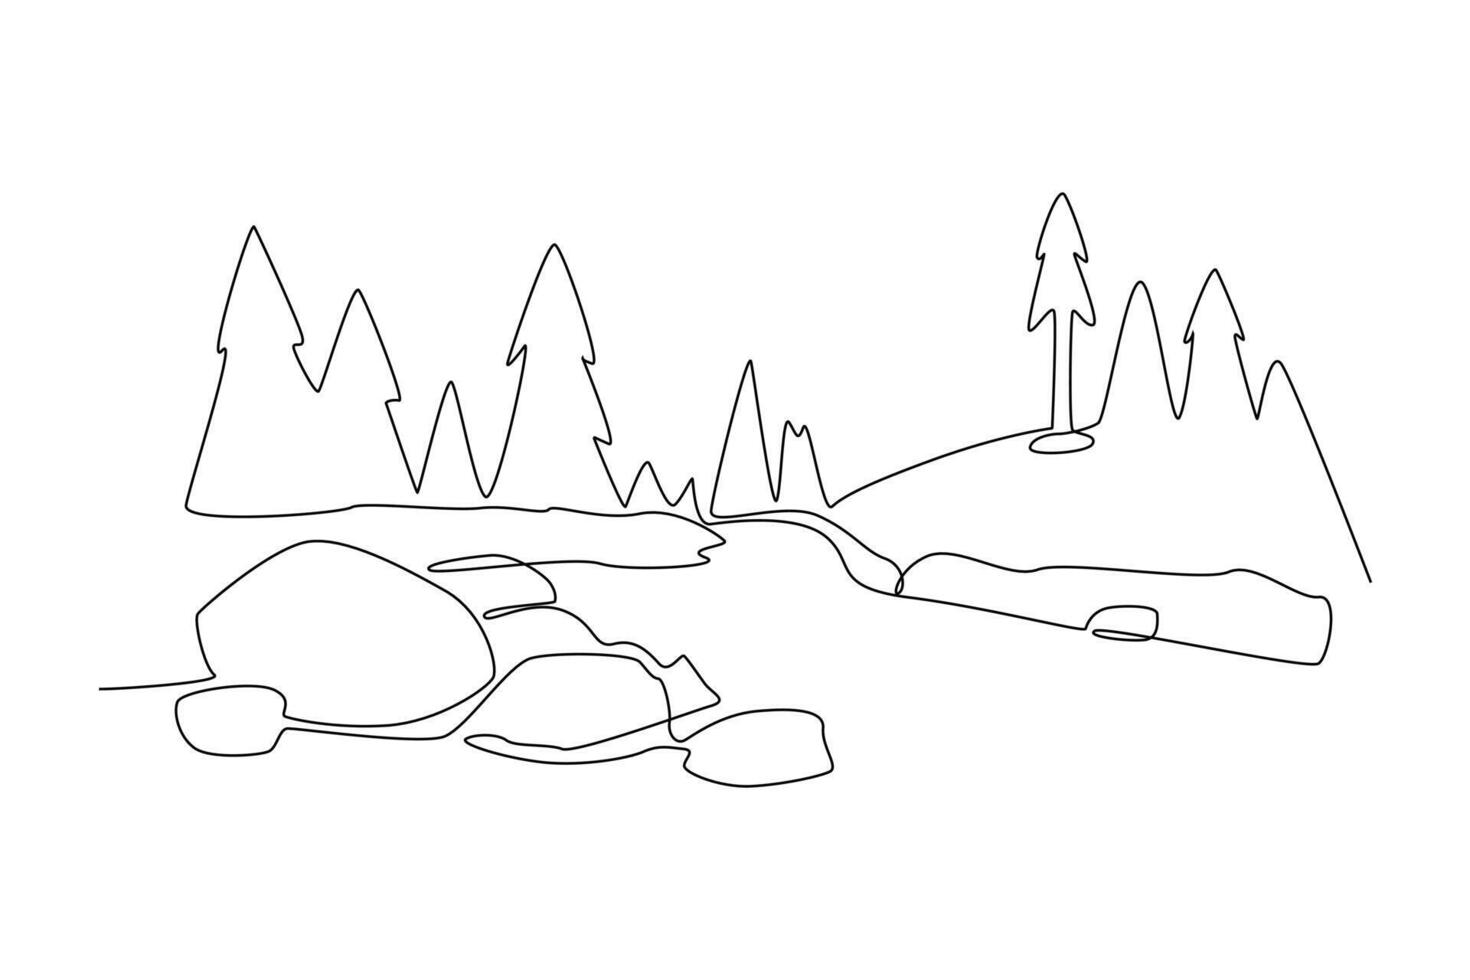 One continuous line drawing of Landscape with green grass, trees, sky horizon and Mountains. Nature concept. Doodle vector illustration in simple linear style.